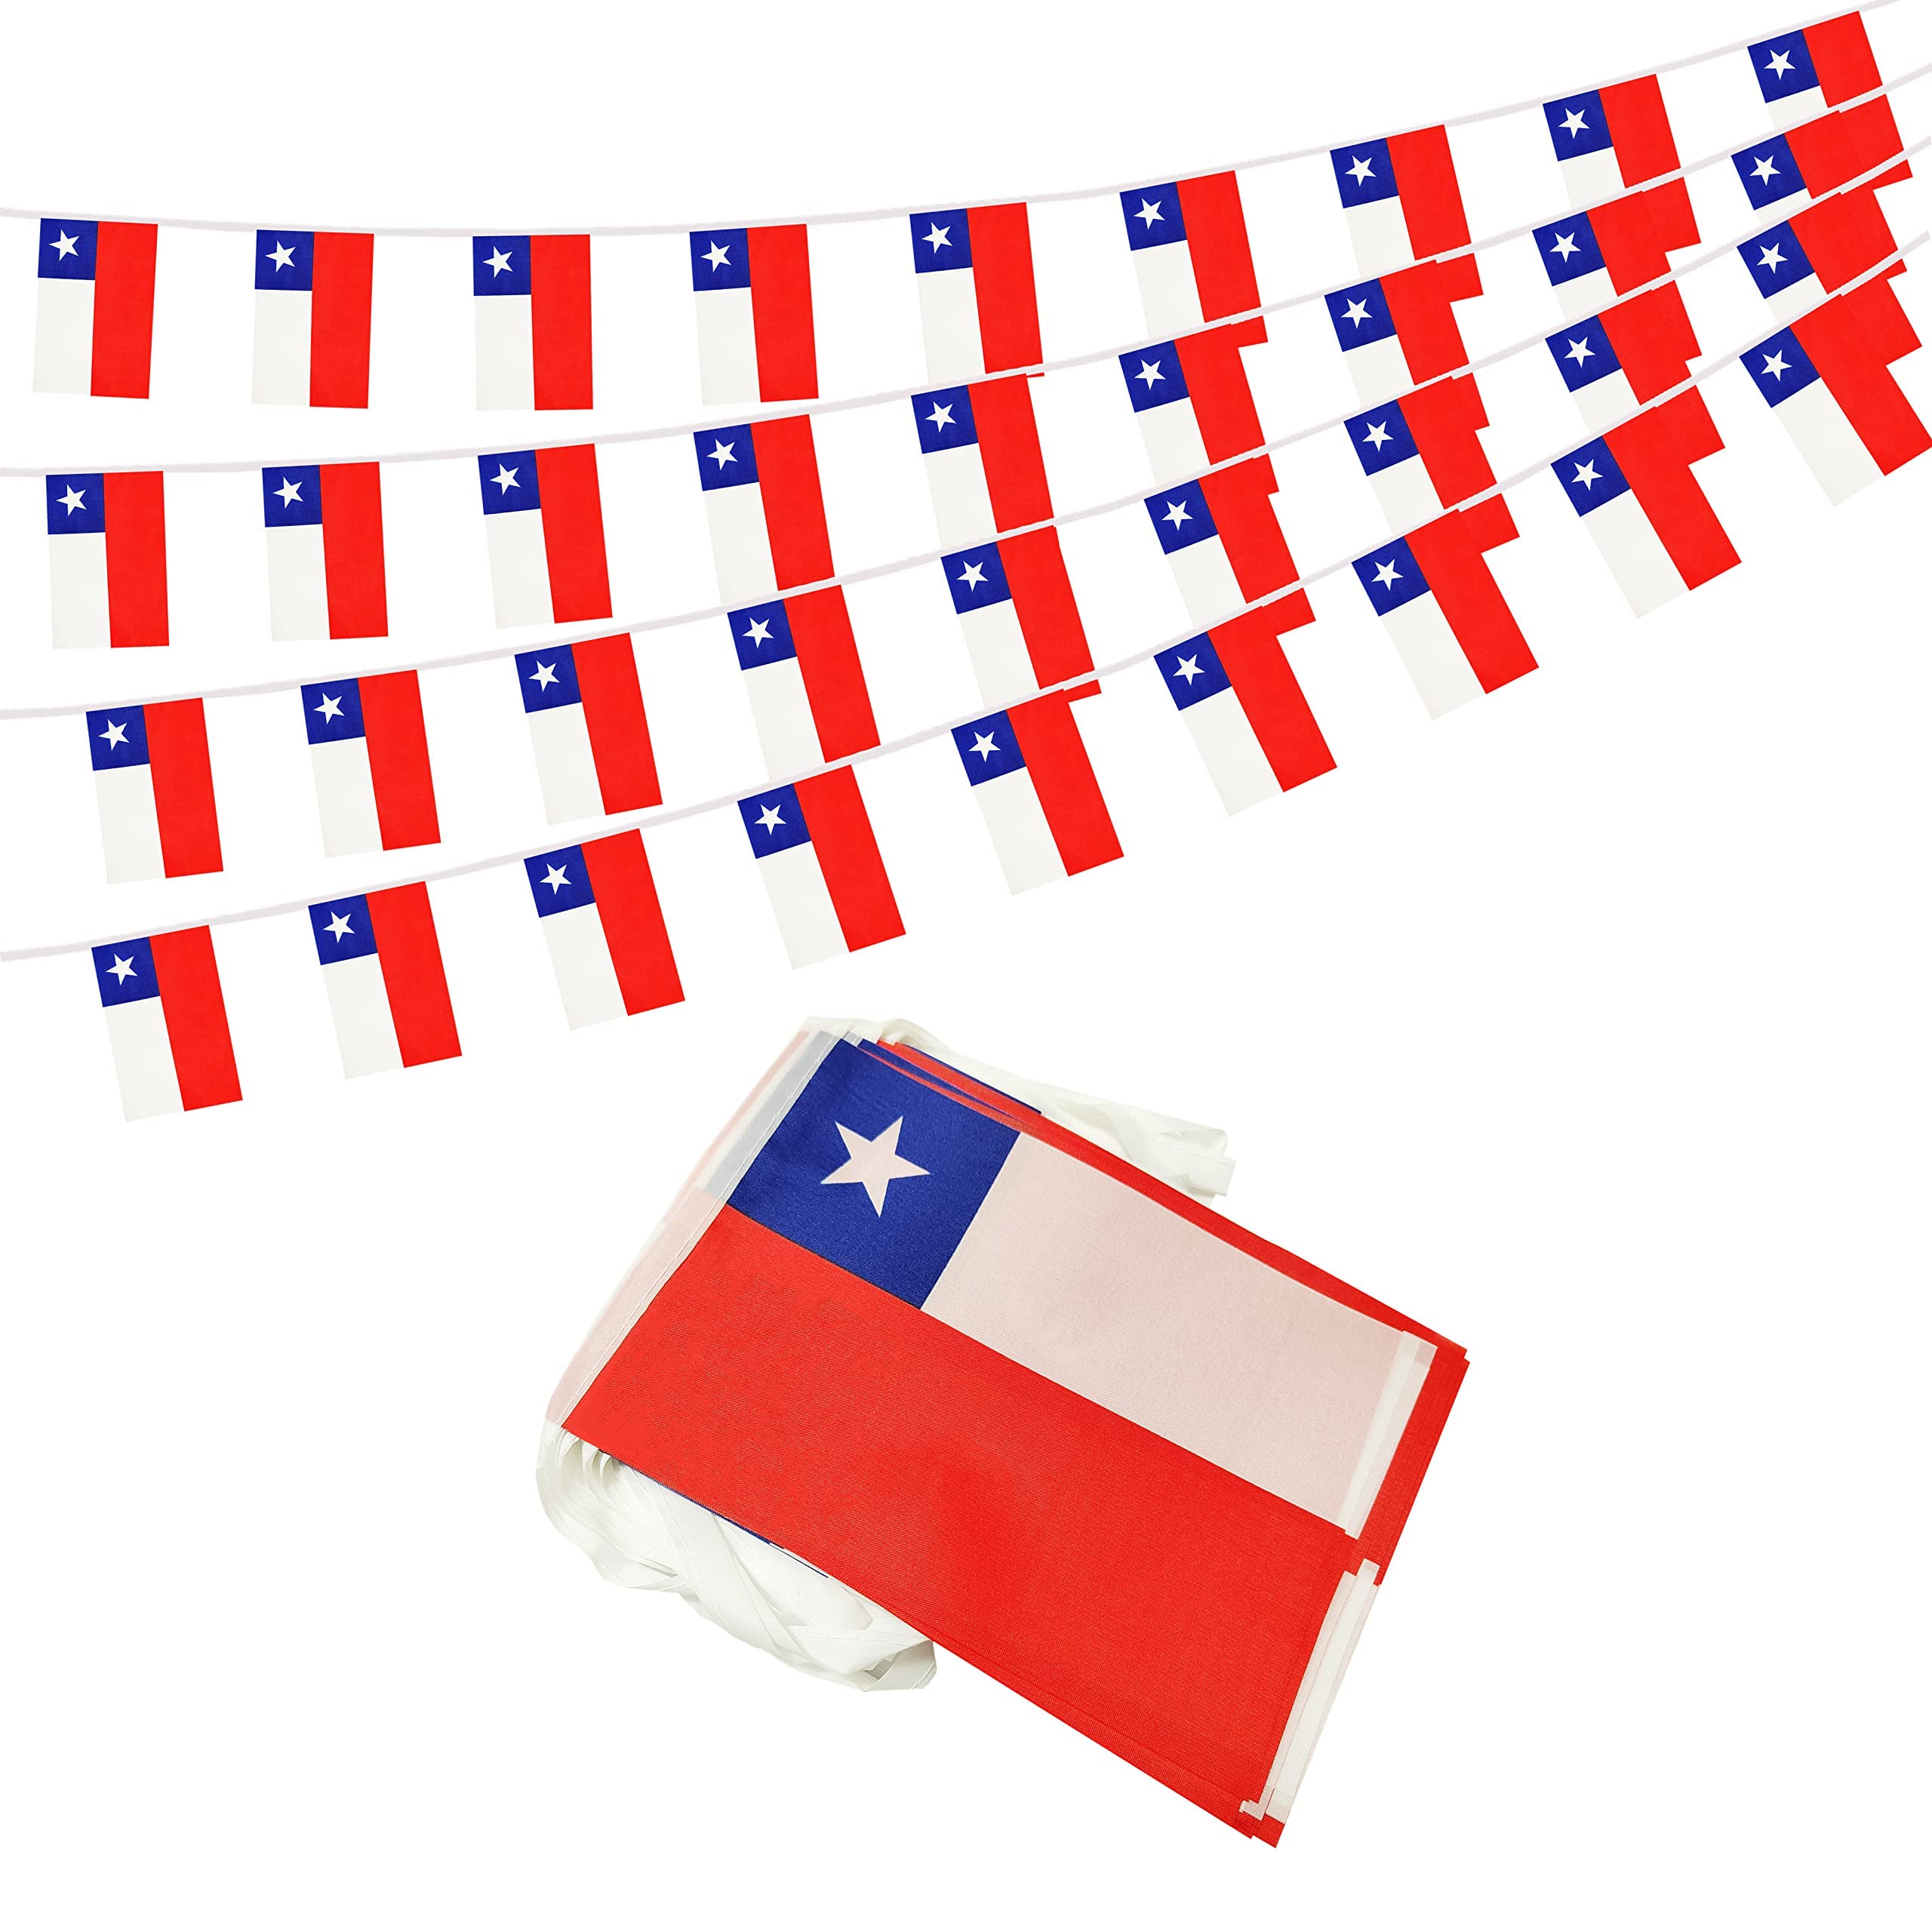 Bclin 50 Feet Chile Chilean Banner Flag String, Chile Mini Flag Small Banner, For Olympics, World Cup, Party, Shops And Bars Dec